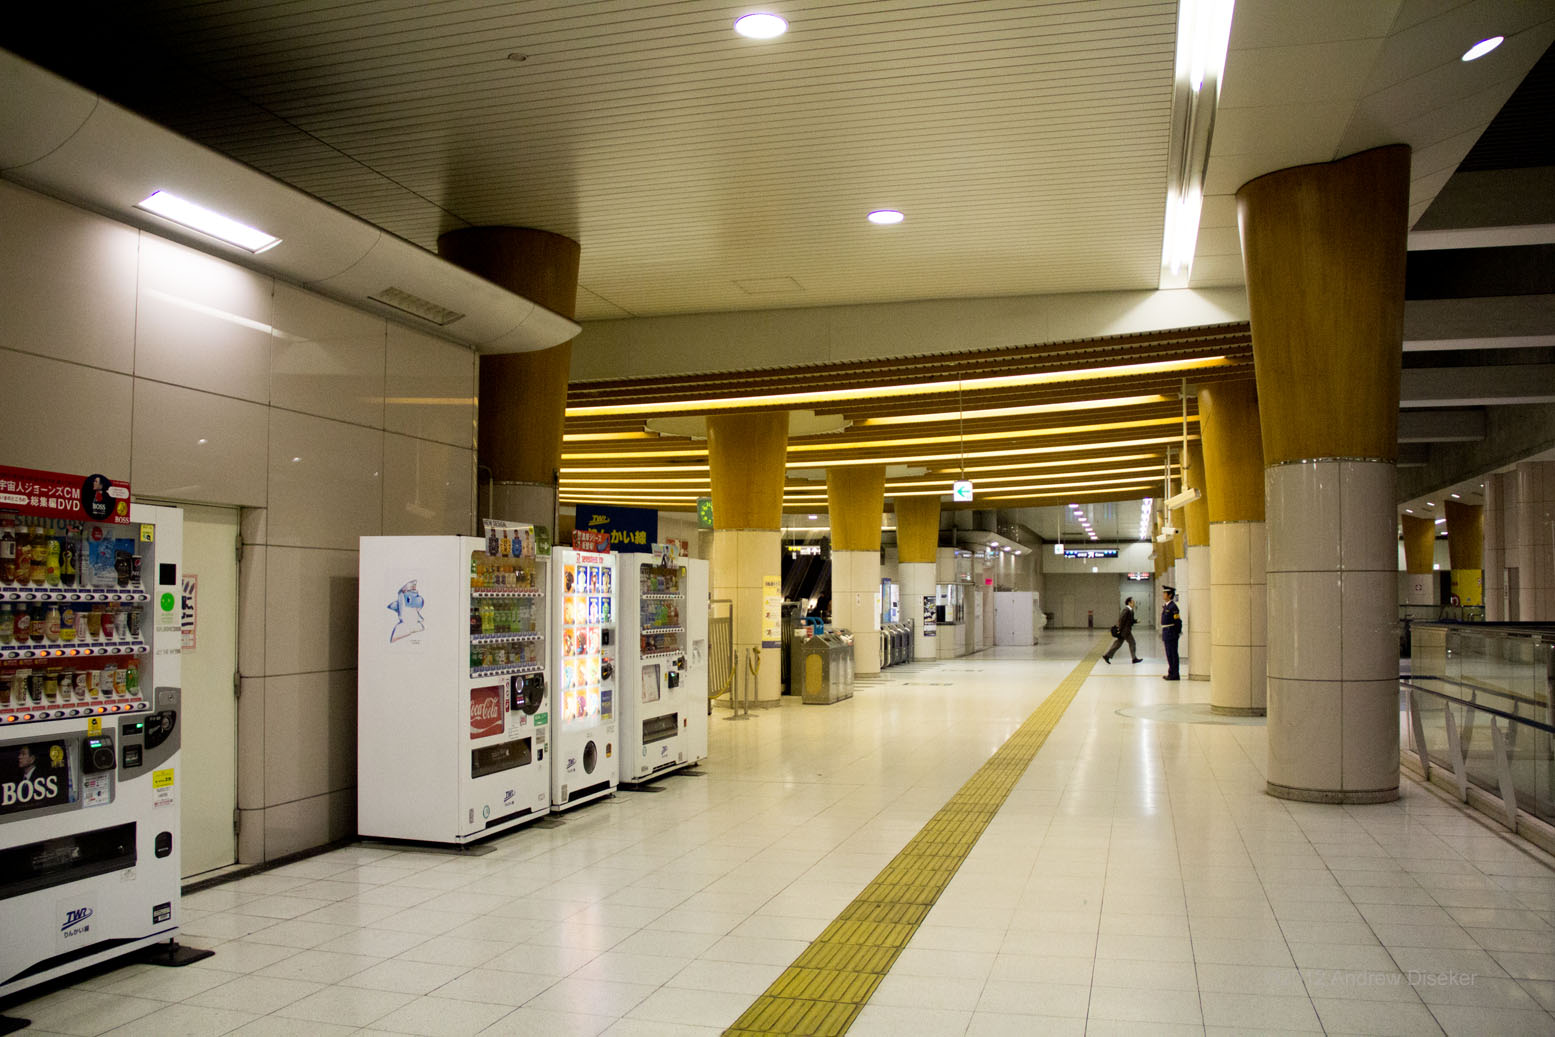 As with all of Japan, the station is guarded by both a guard, and a bank of vending machines, all ever at the ready!